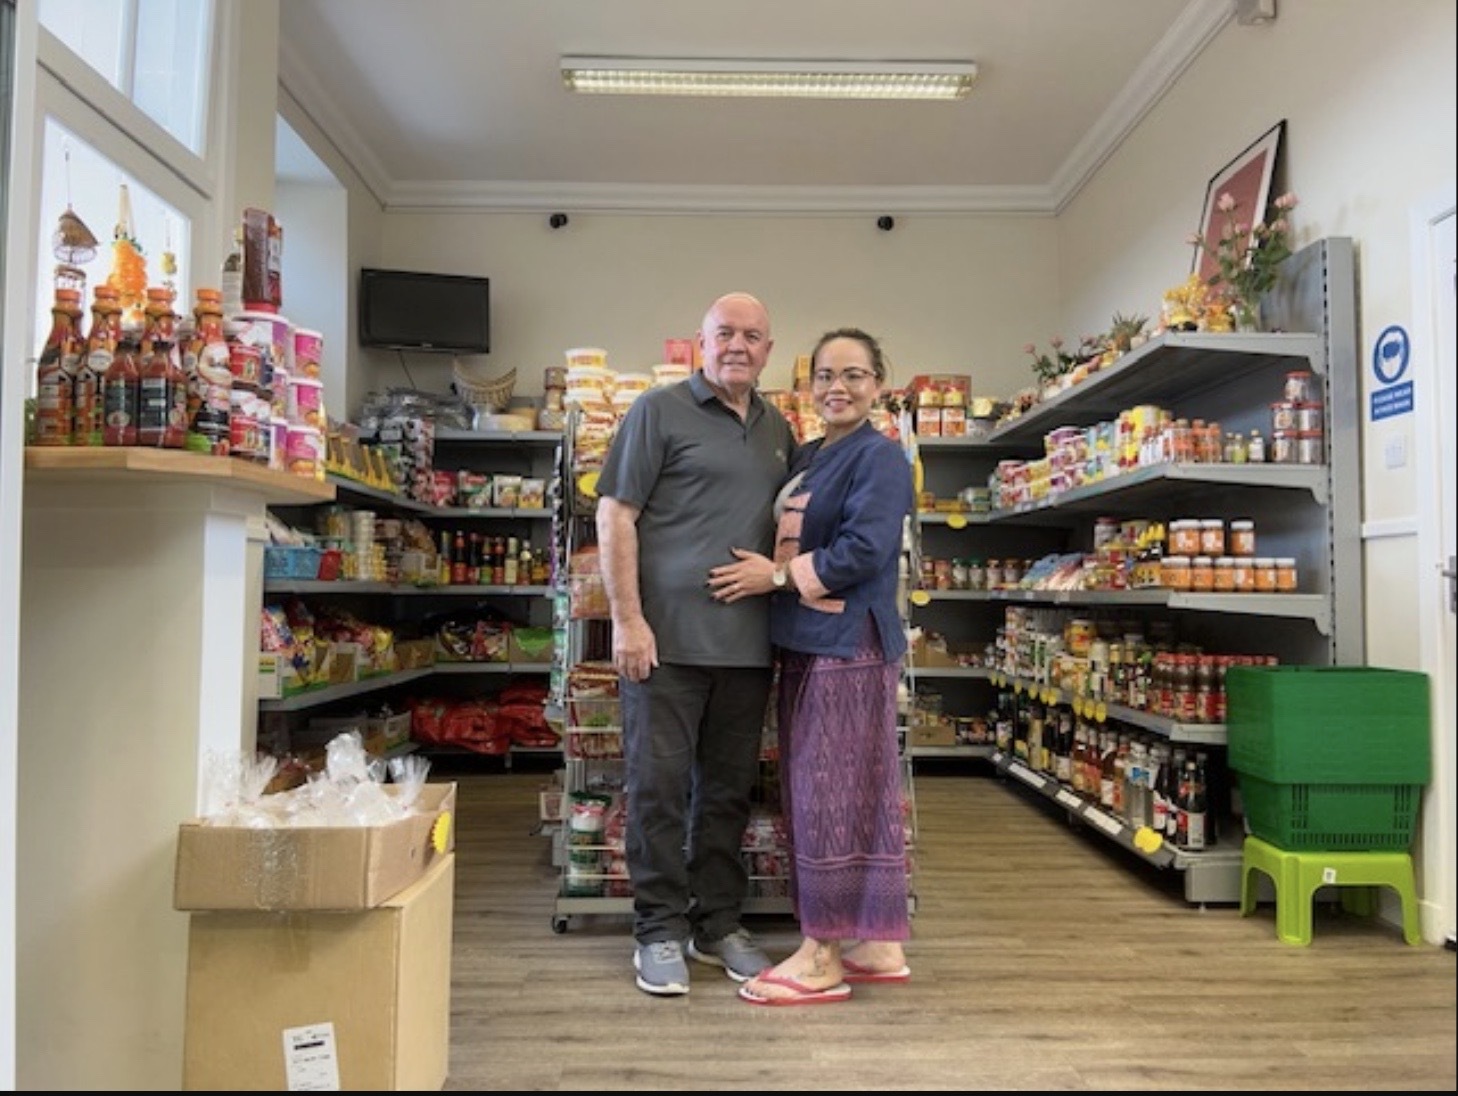 Asian food market on track to expand thanks to support from Business Gateway